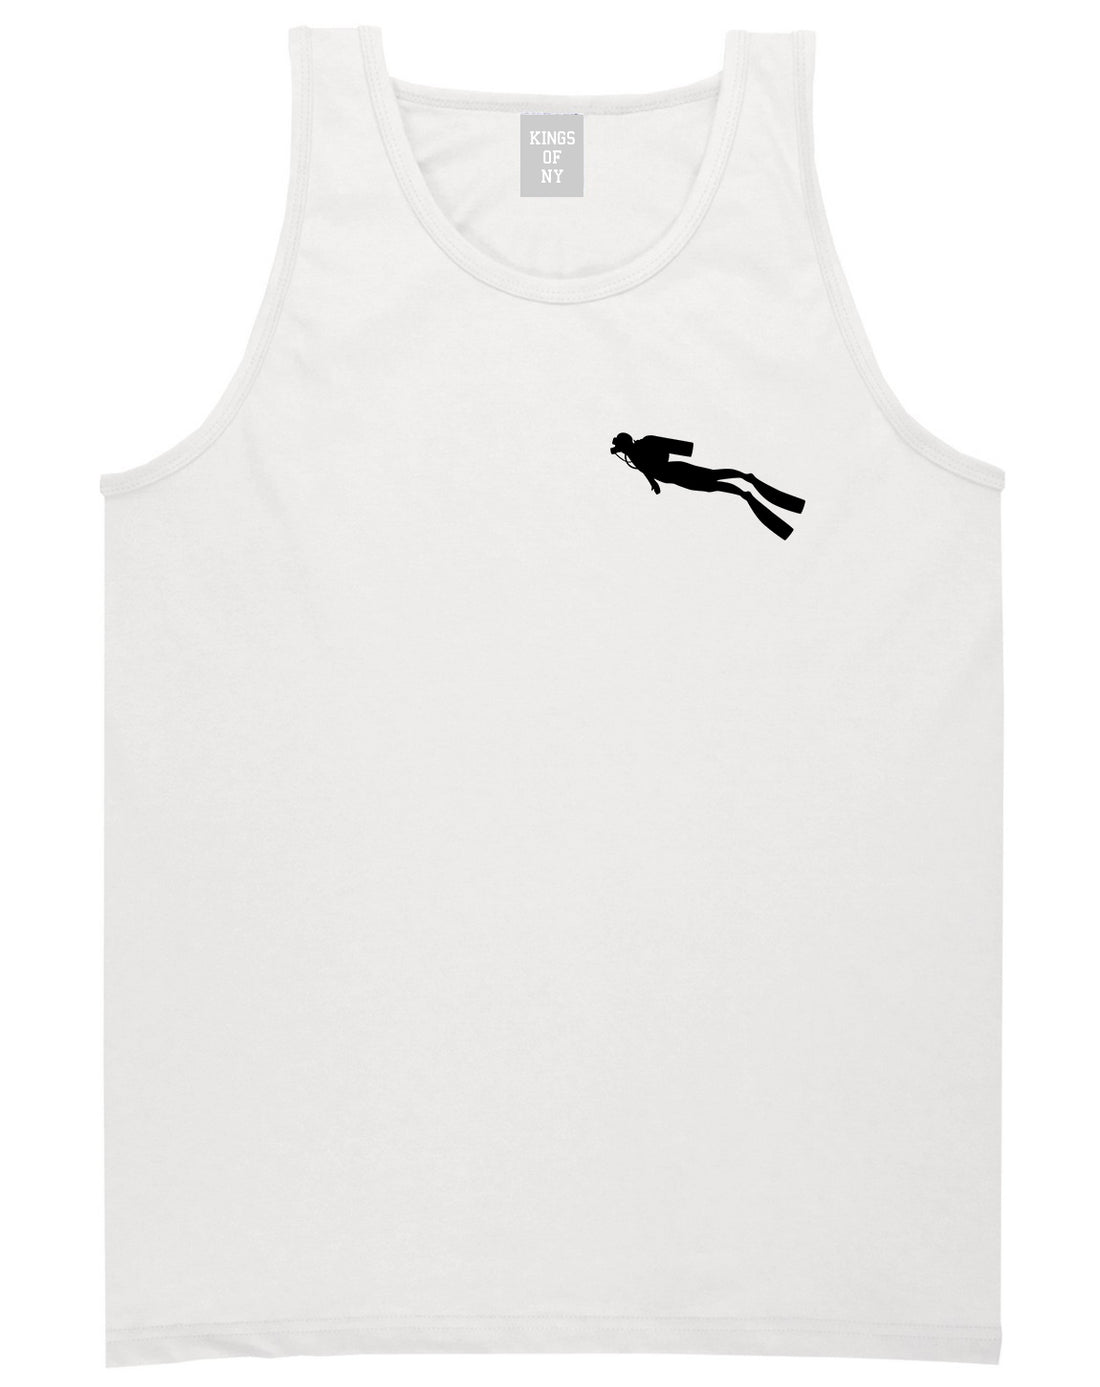 Scuba_Diver_Chest Mens White Tank Top Shirt by Kings Of NY